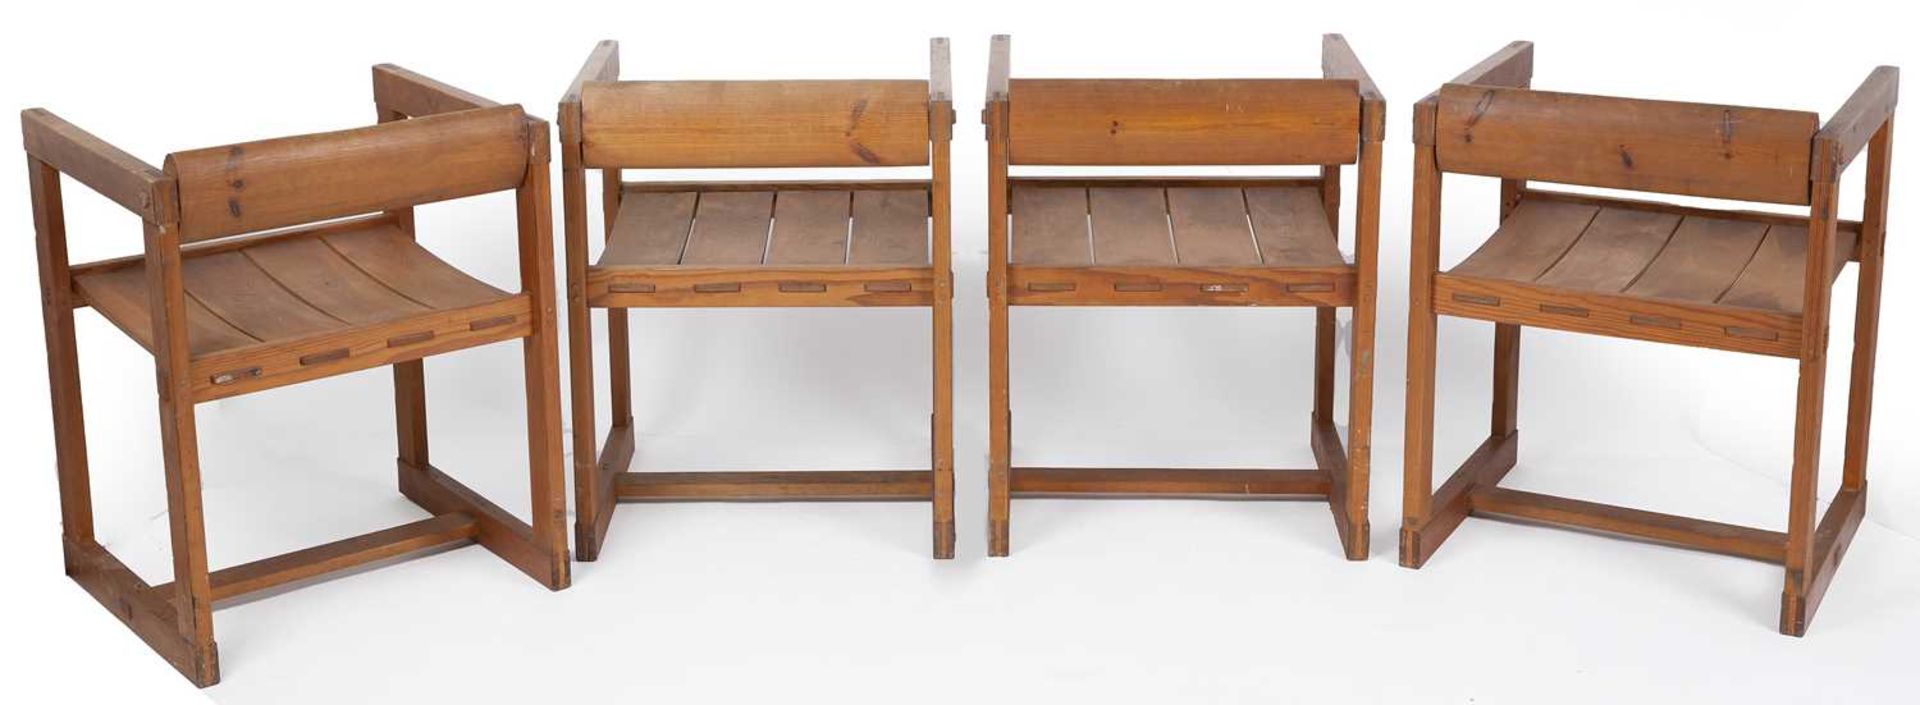 Edvin Helseth (1925-2017) Four Trybo chairs, circa 1960 pine with pegged joints 65cm high, 53cm wide - Image 4 of 6